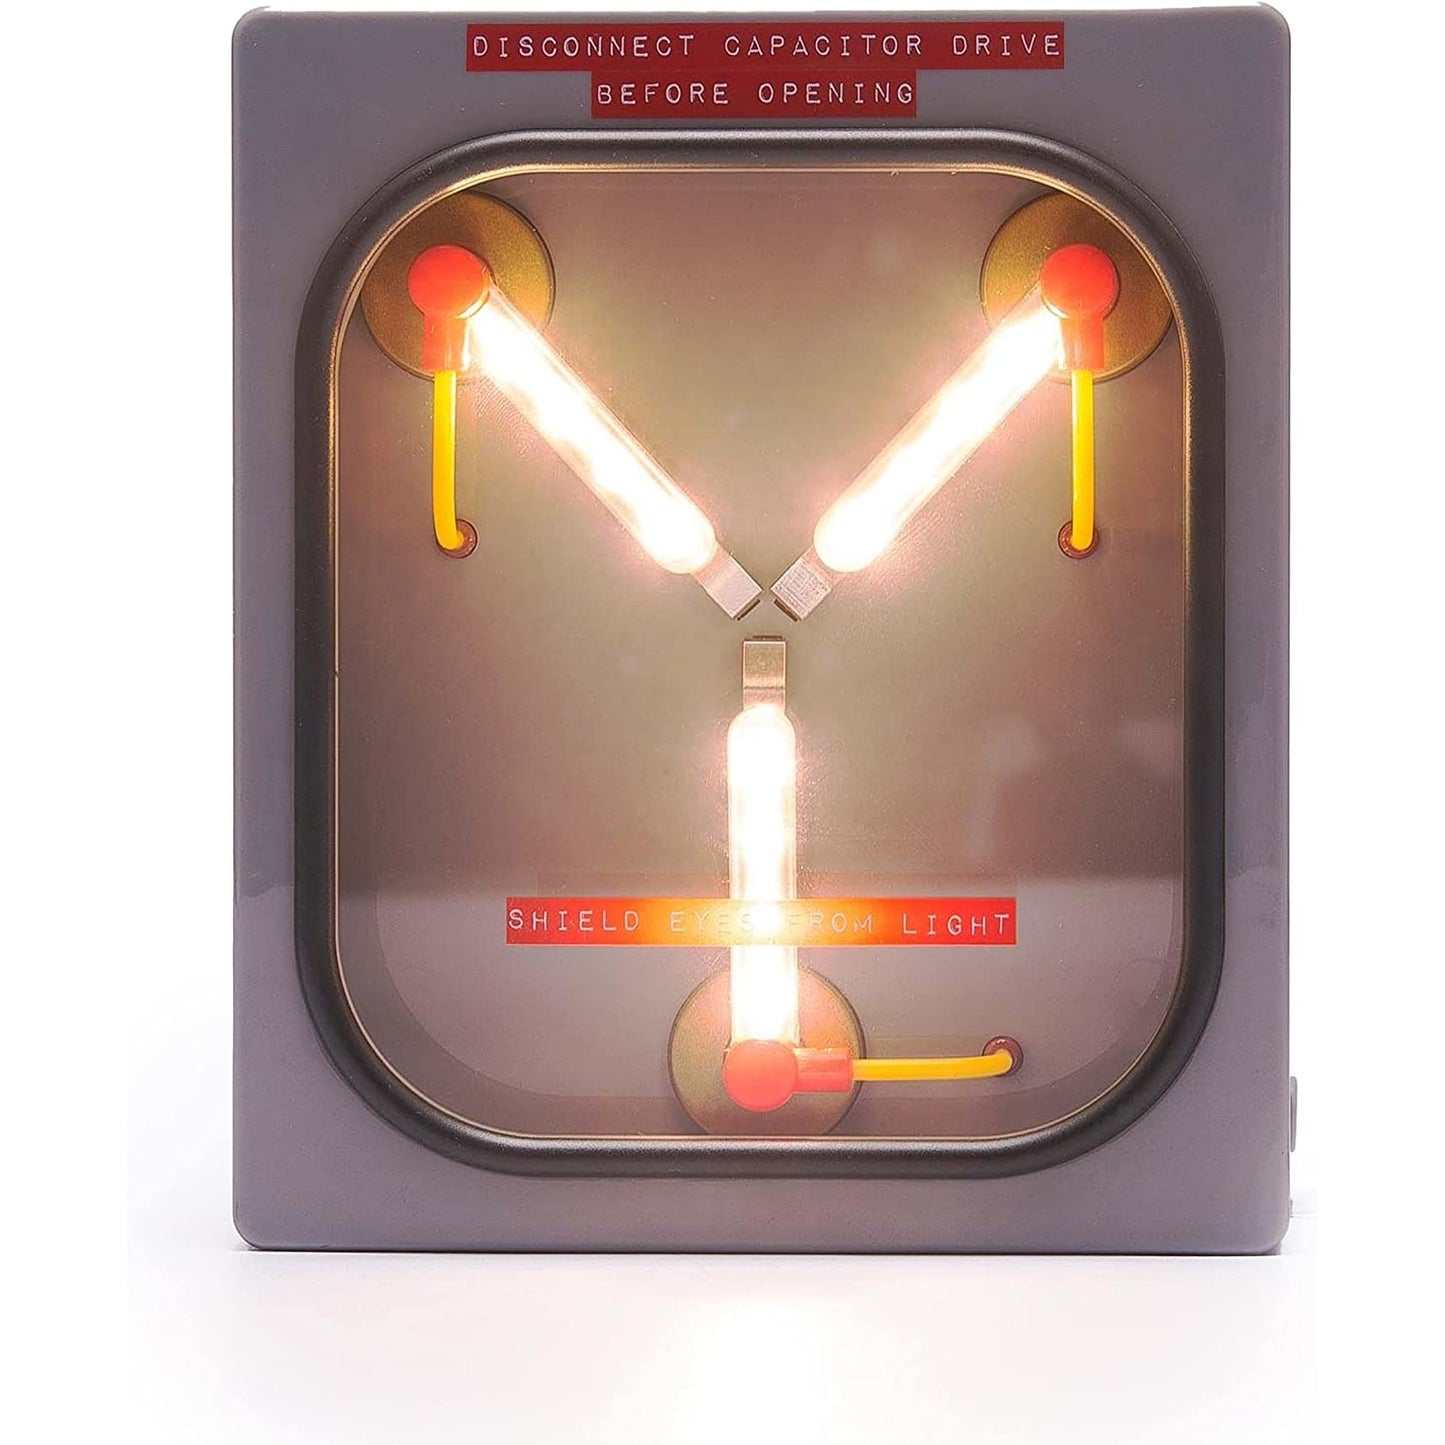 Back to the Future Flux Capacitor replica mood light.